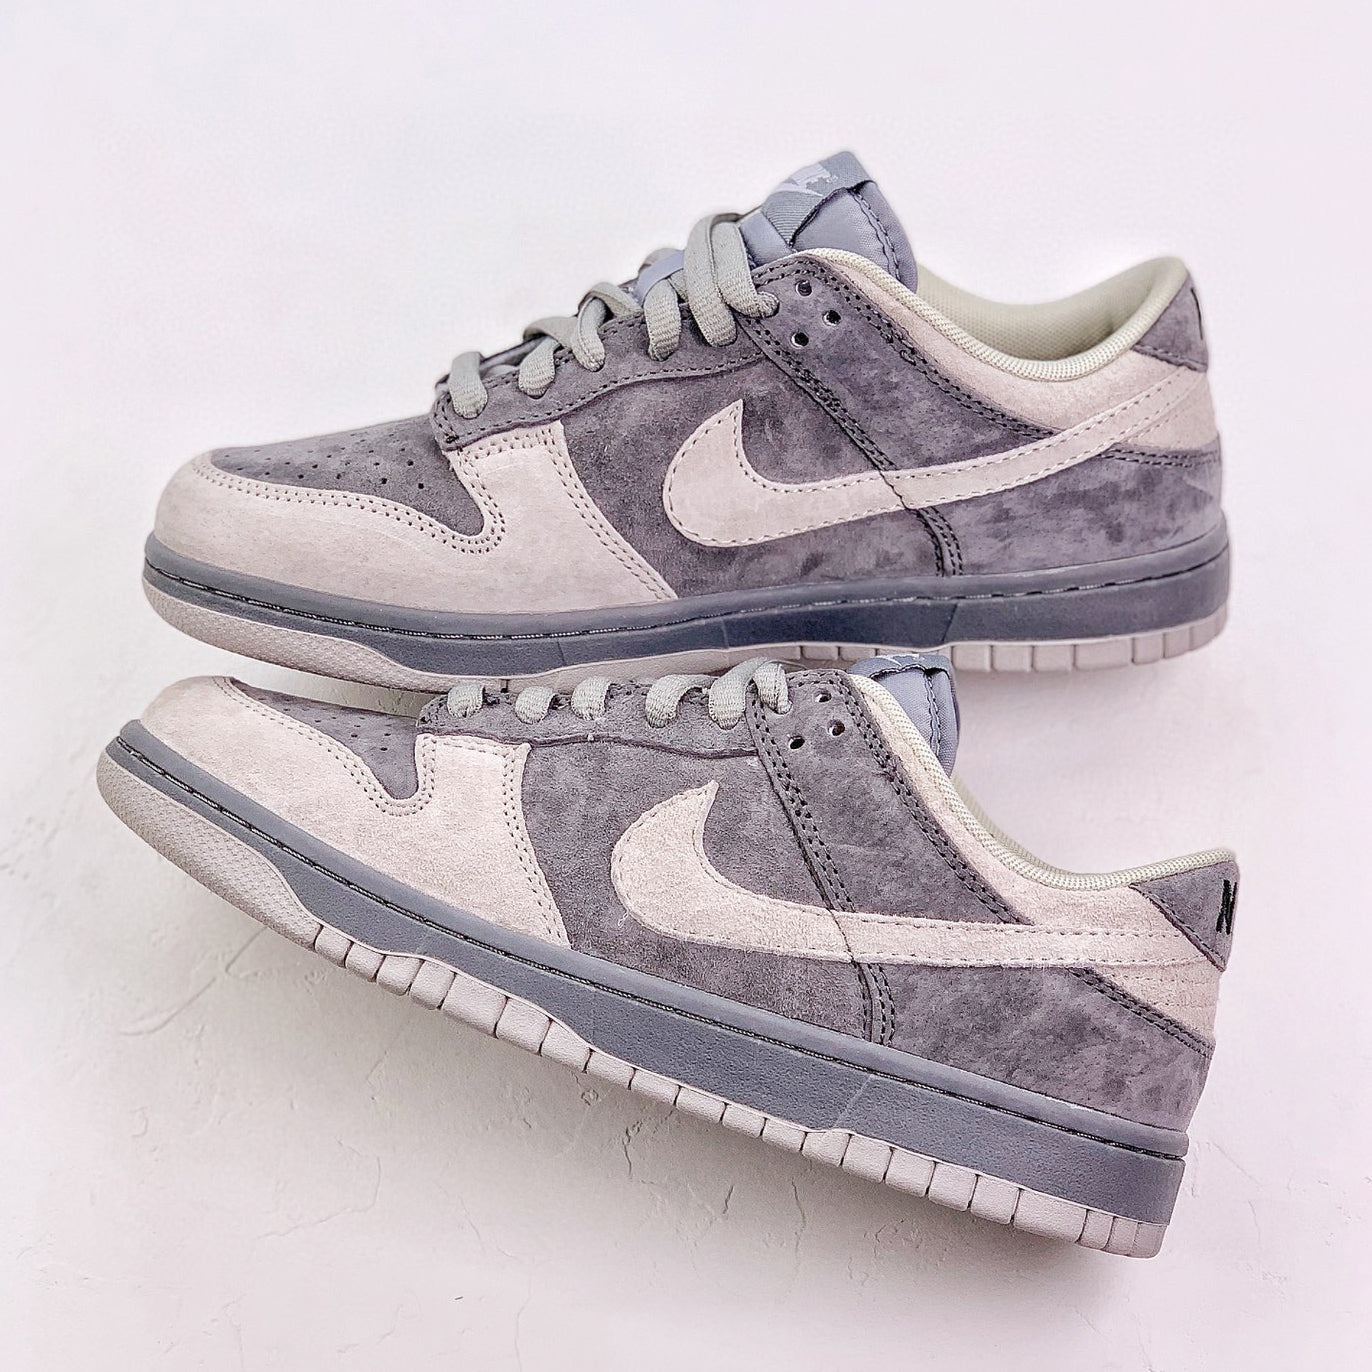 NIKE SB Dunk Low-Top Sneakers Shoes